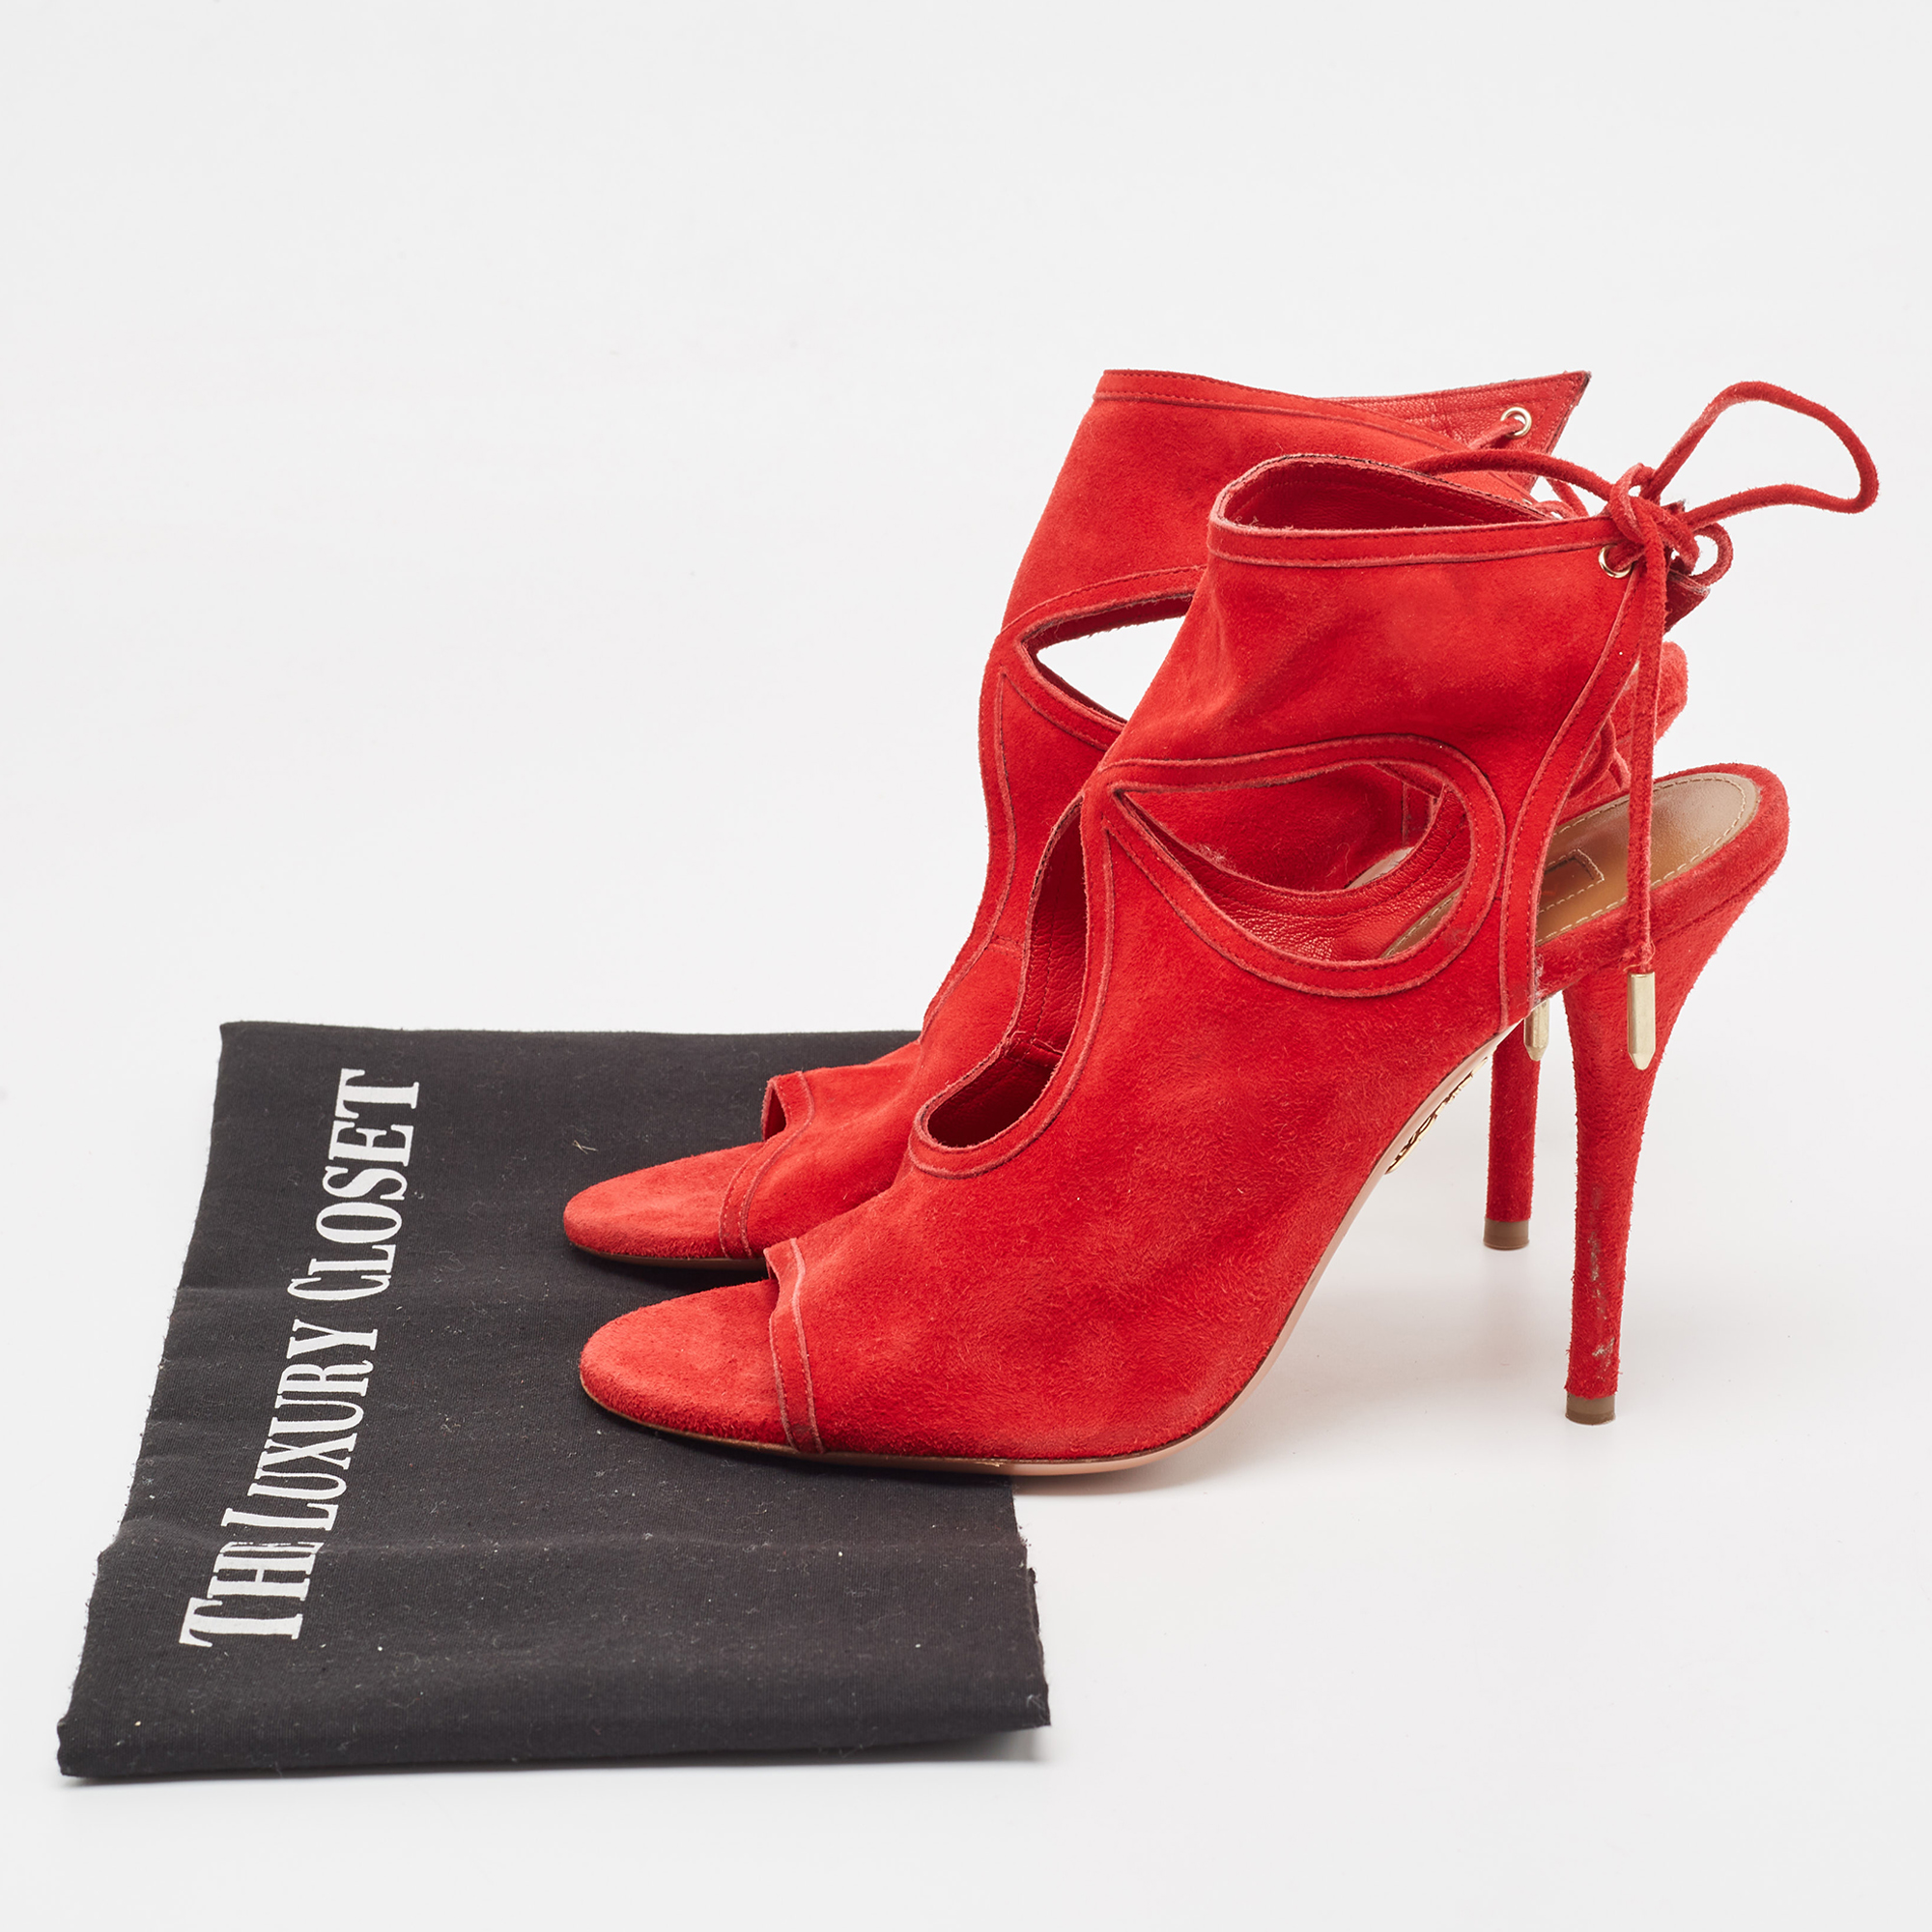 Aquazzura Red Suede Sexy Thing Ankle Strap Sandals Size 37